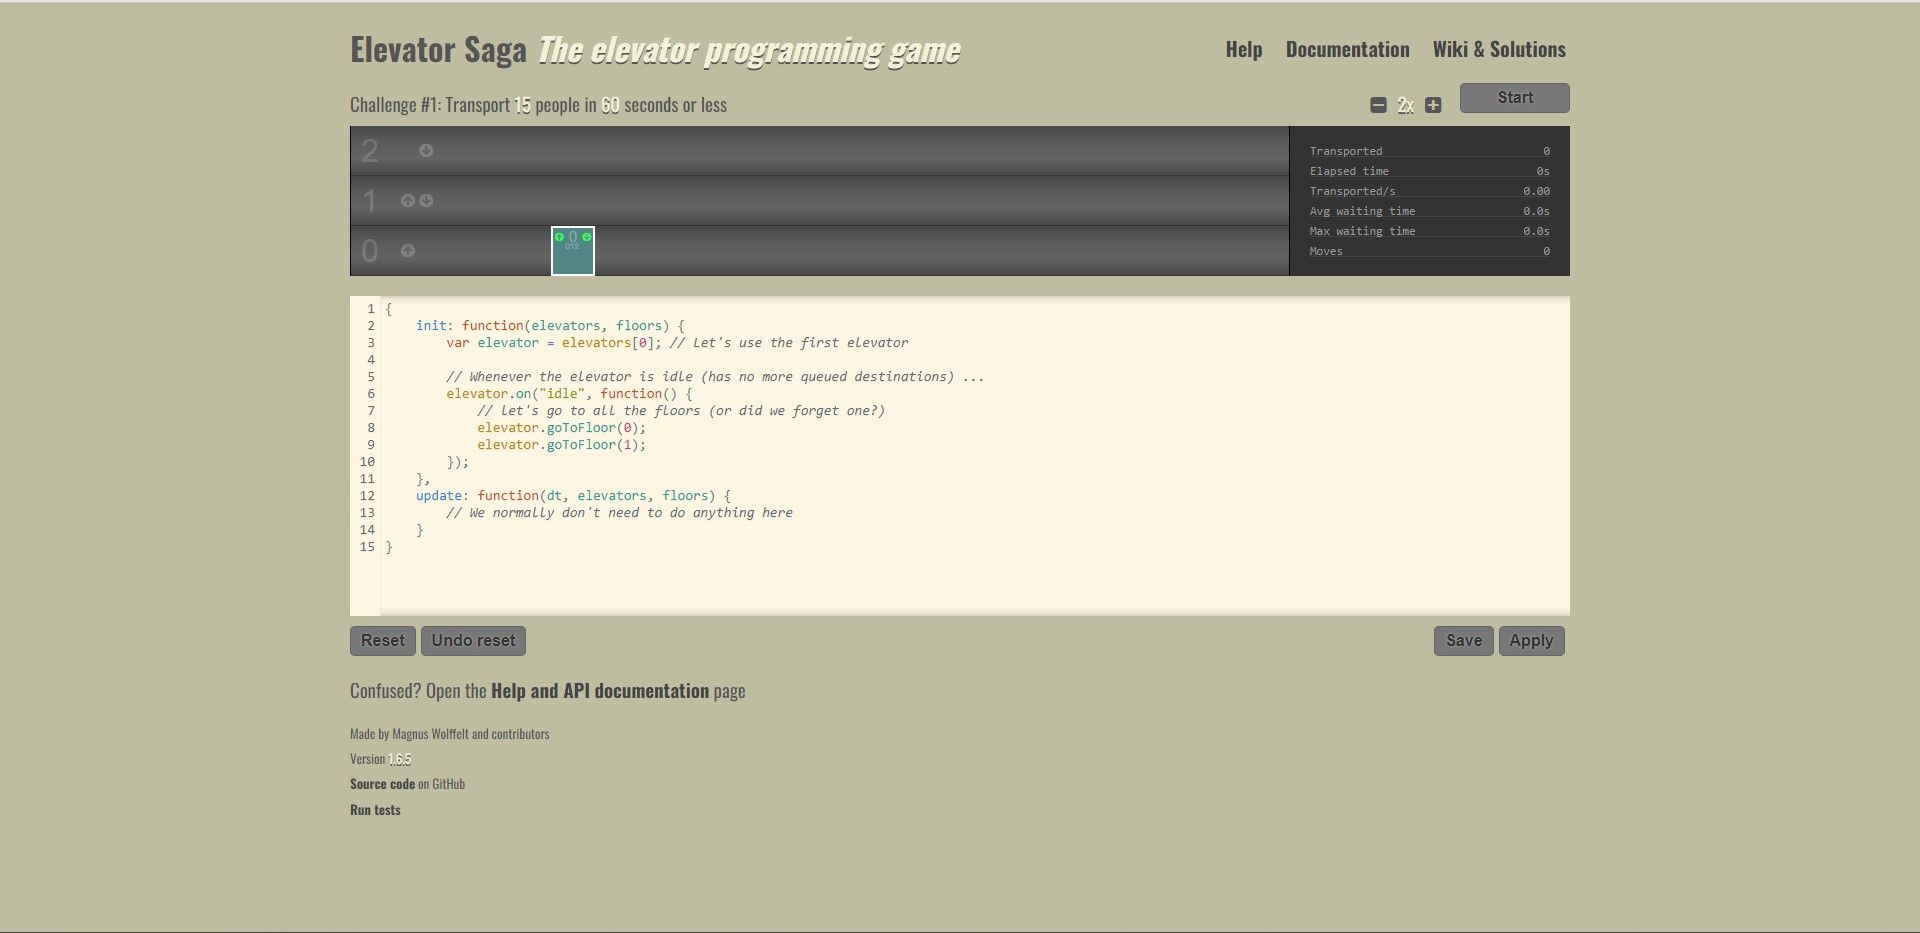 Elevator Saga website interface showing code snippets and buttons